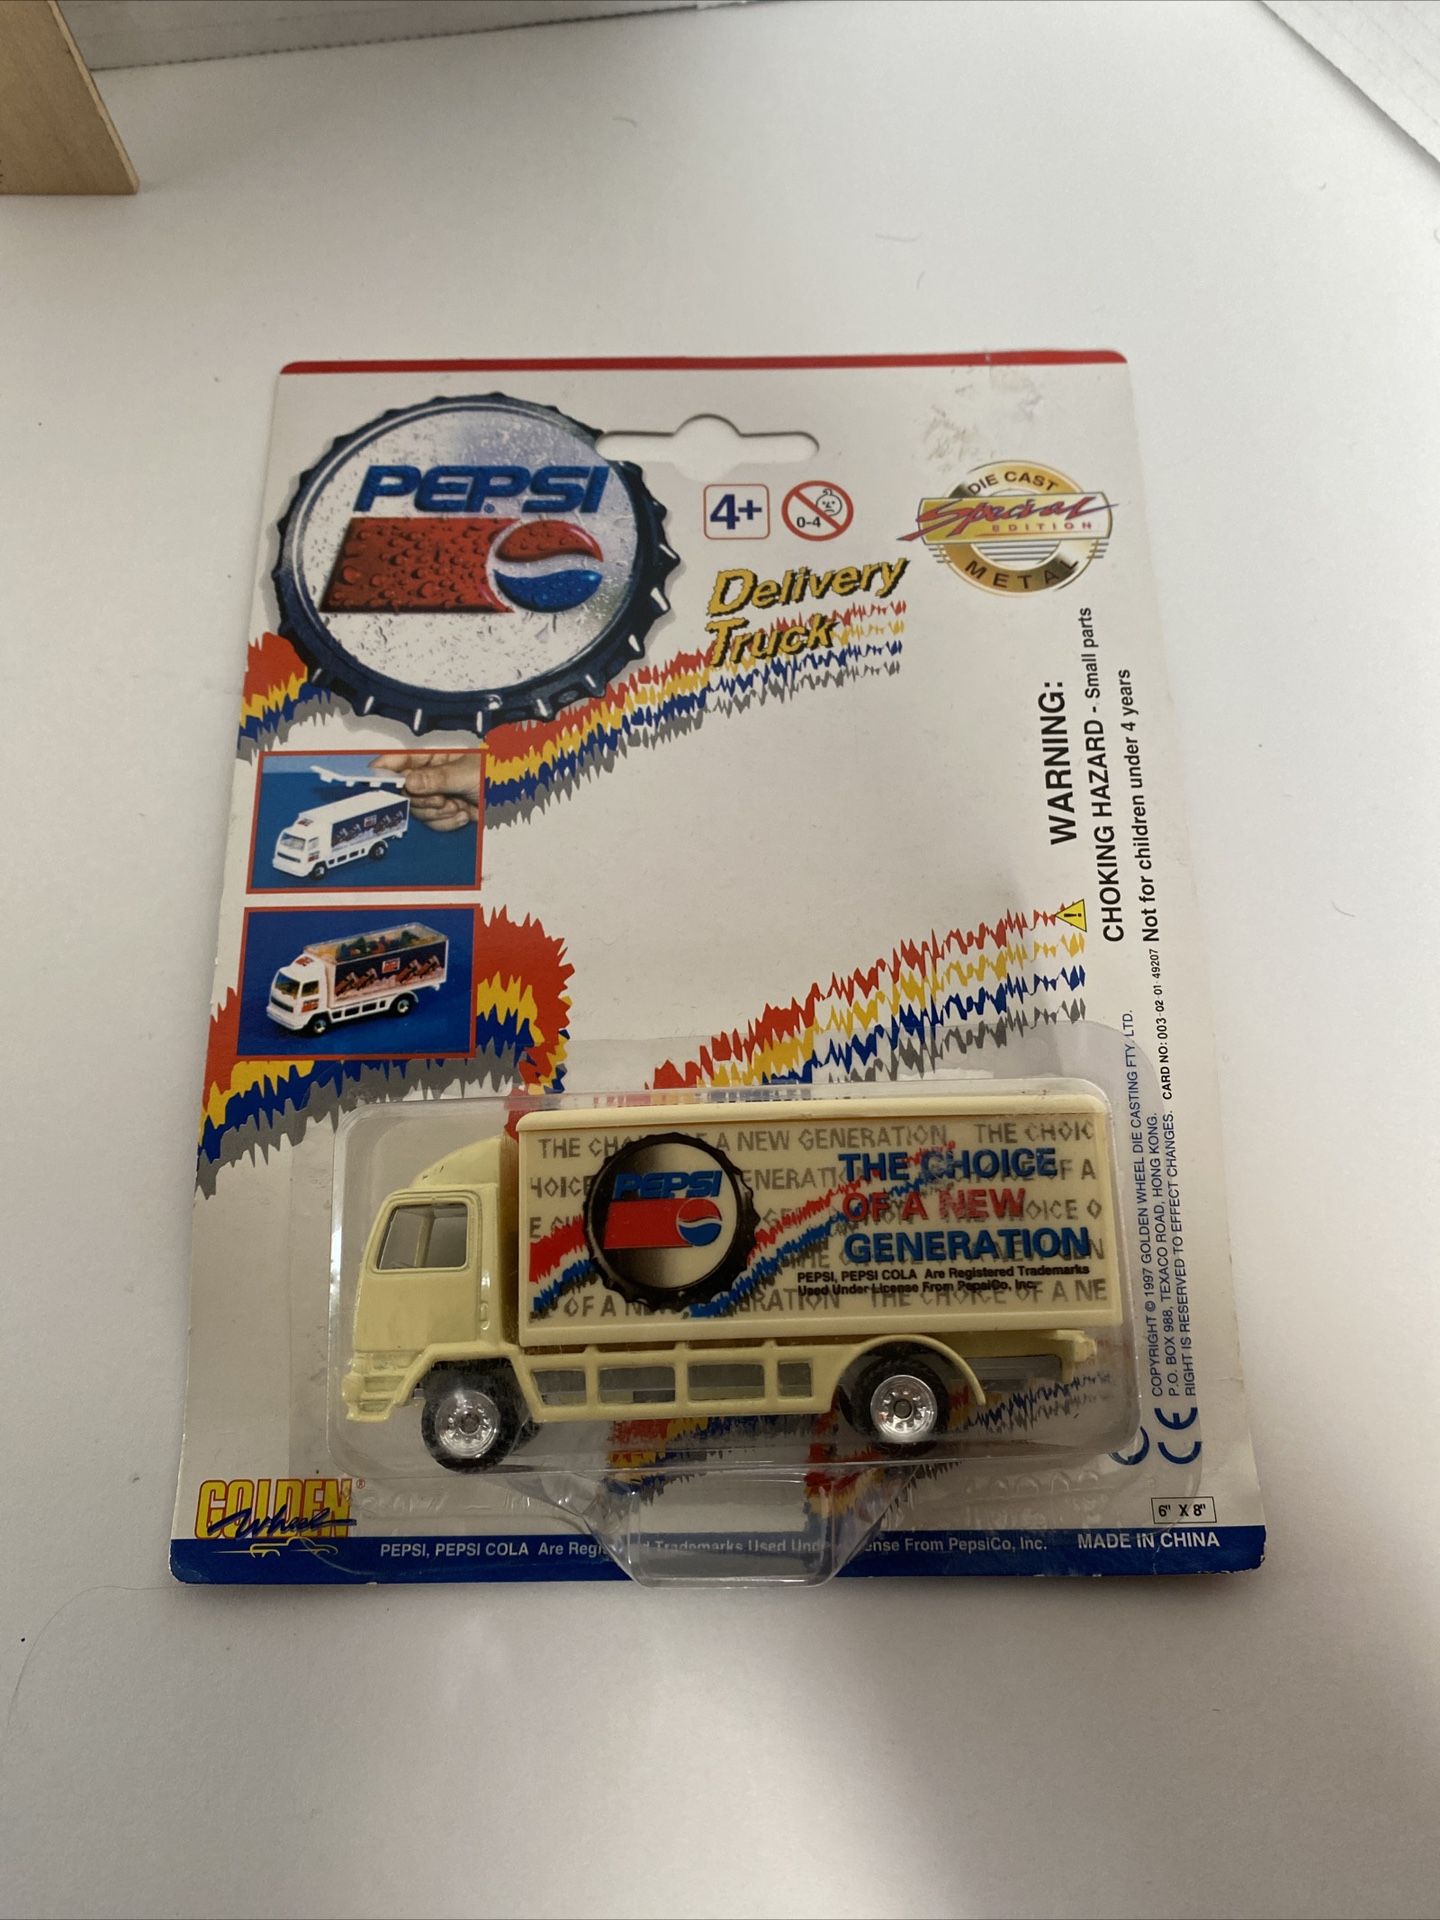 New 1997 Golden Wheels Pepsi Delivery Truck Toy 